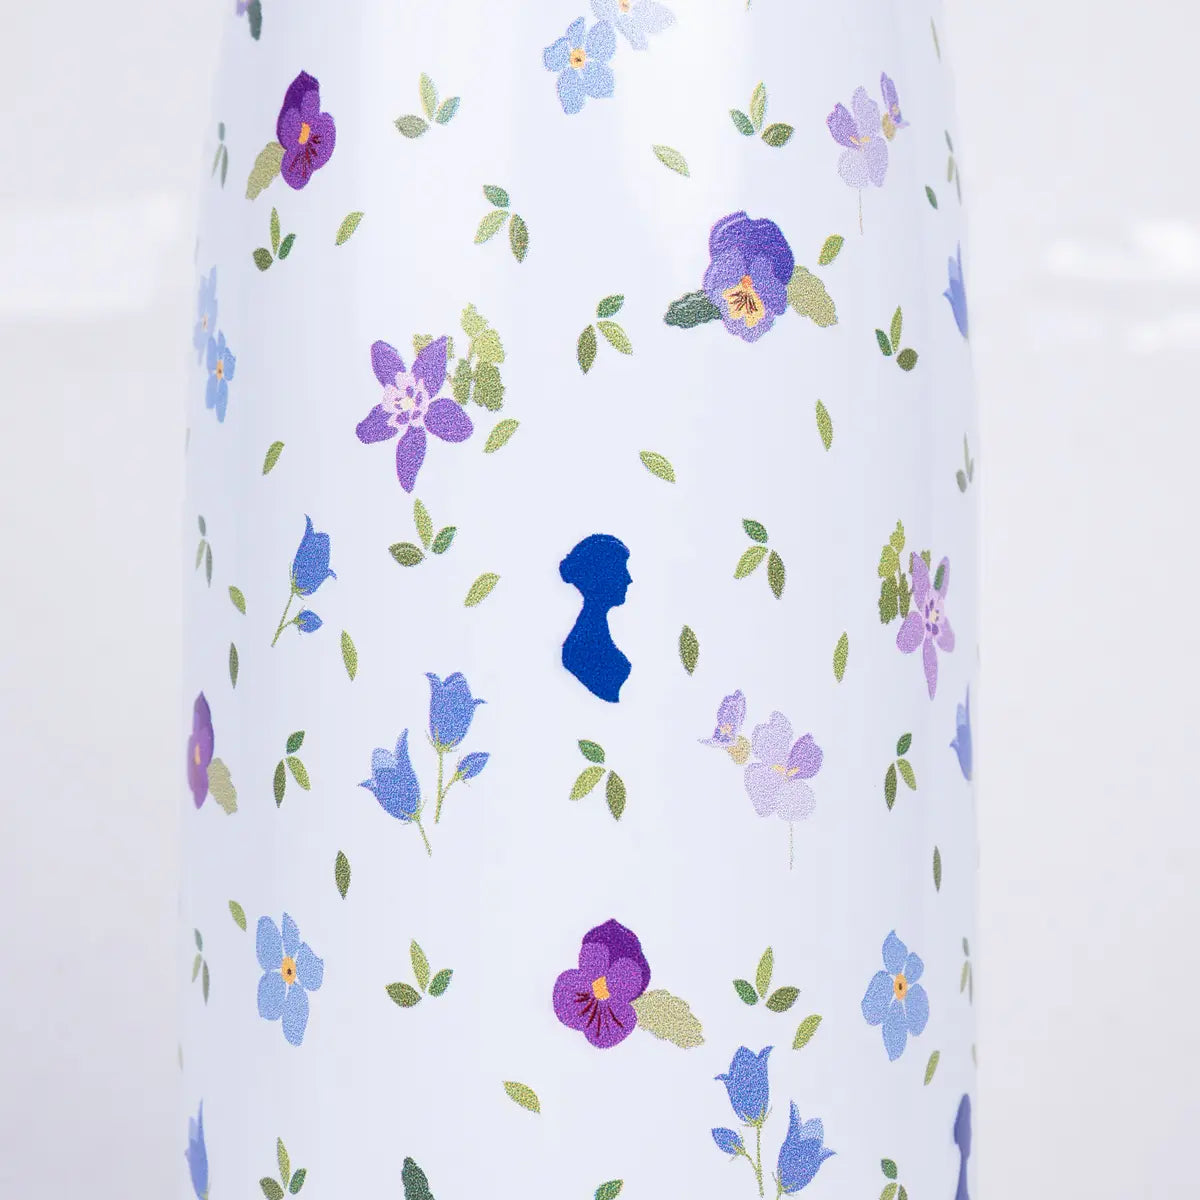 Designed with Jane Austen's iconic silhouette and adorable floral illustrations.